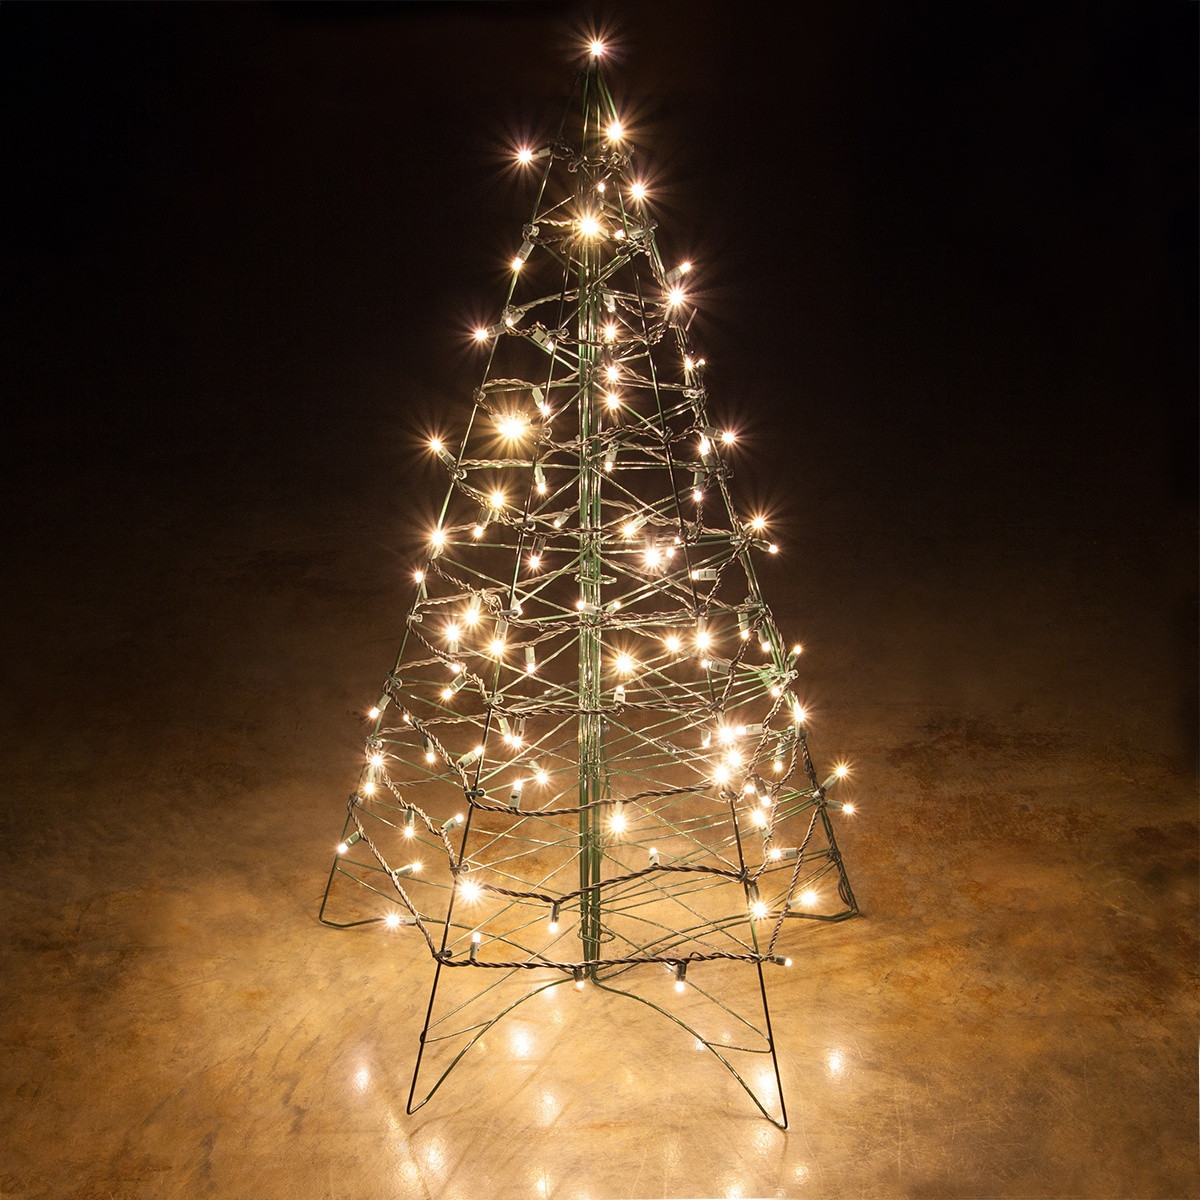 Outdoor Christmas Tree With Lights
 Lighted Warm White LED Outdoor Christmas Tree